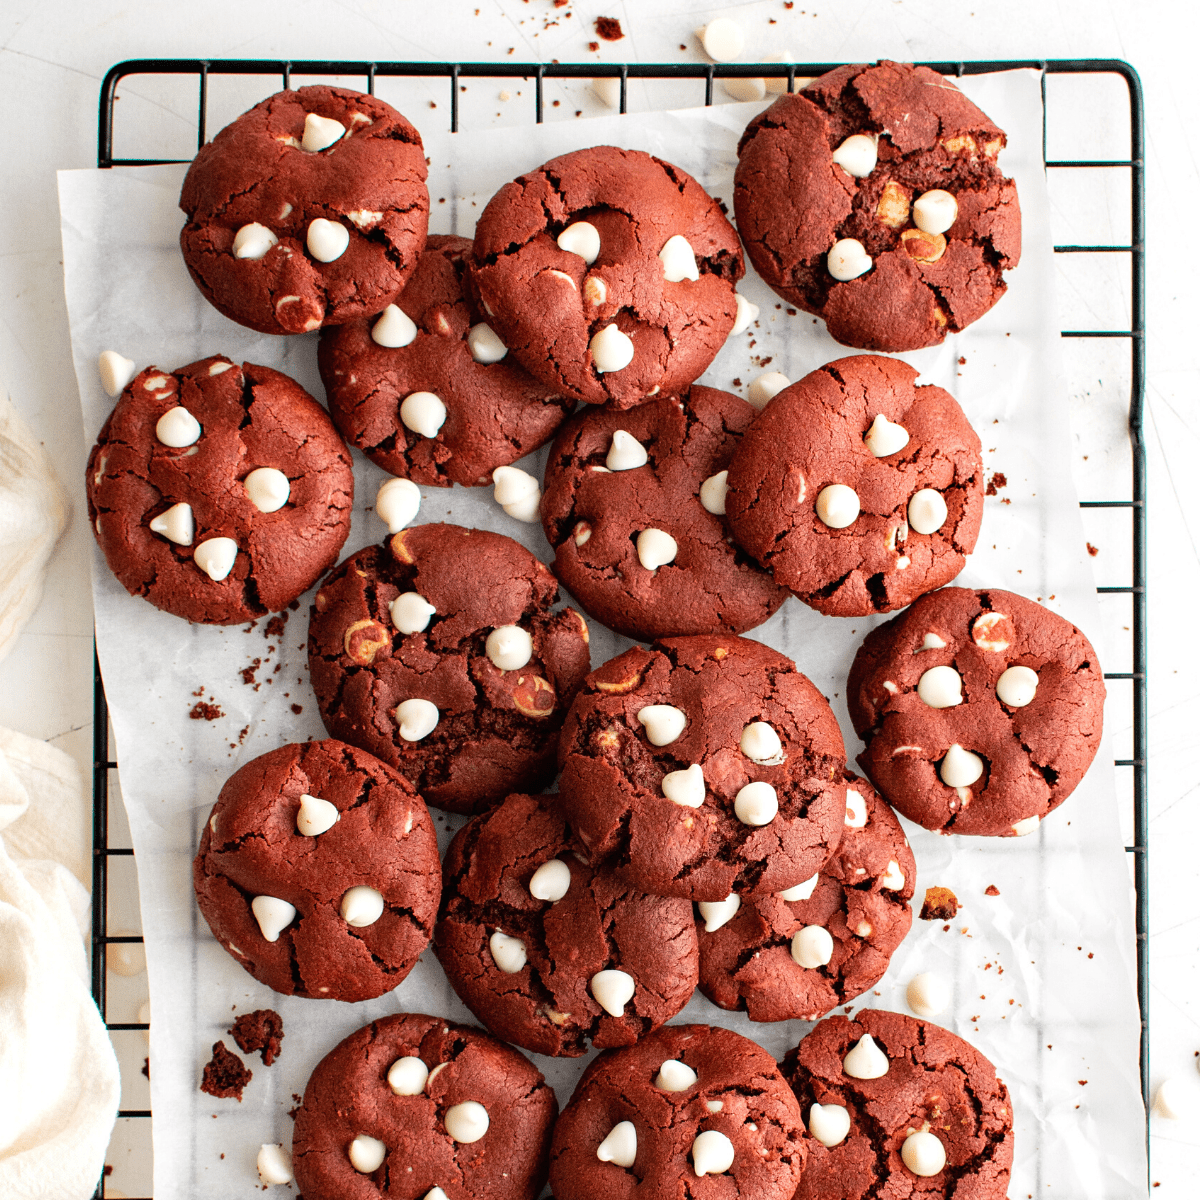 https://thefirstyearblog.com/wp-content/uploads/2022/01/red-velvet-cookies-2022-Square-1.png